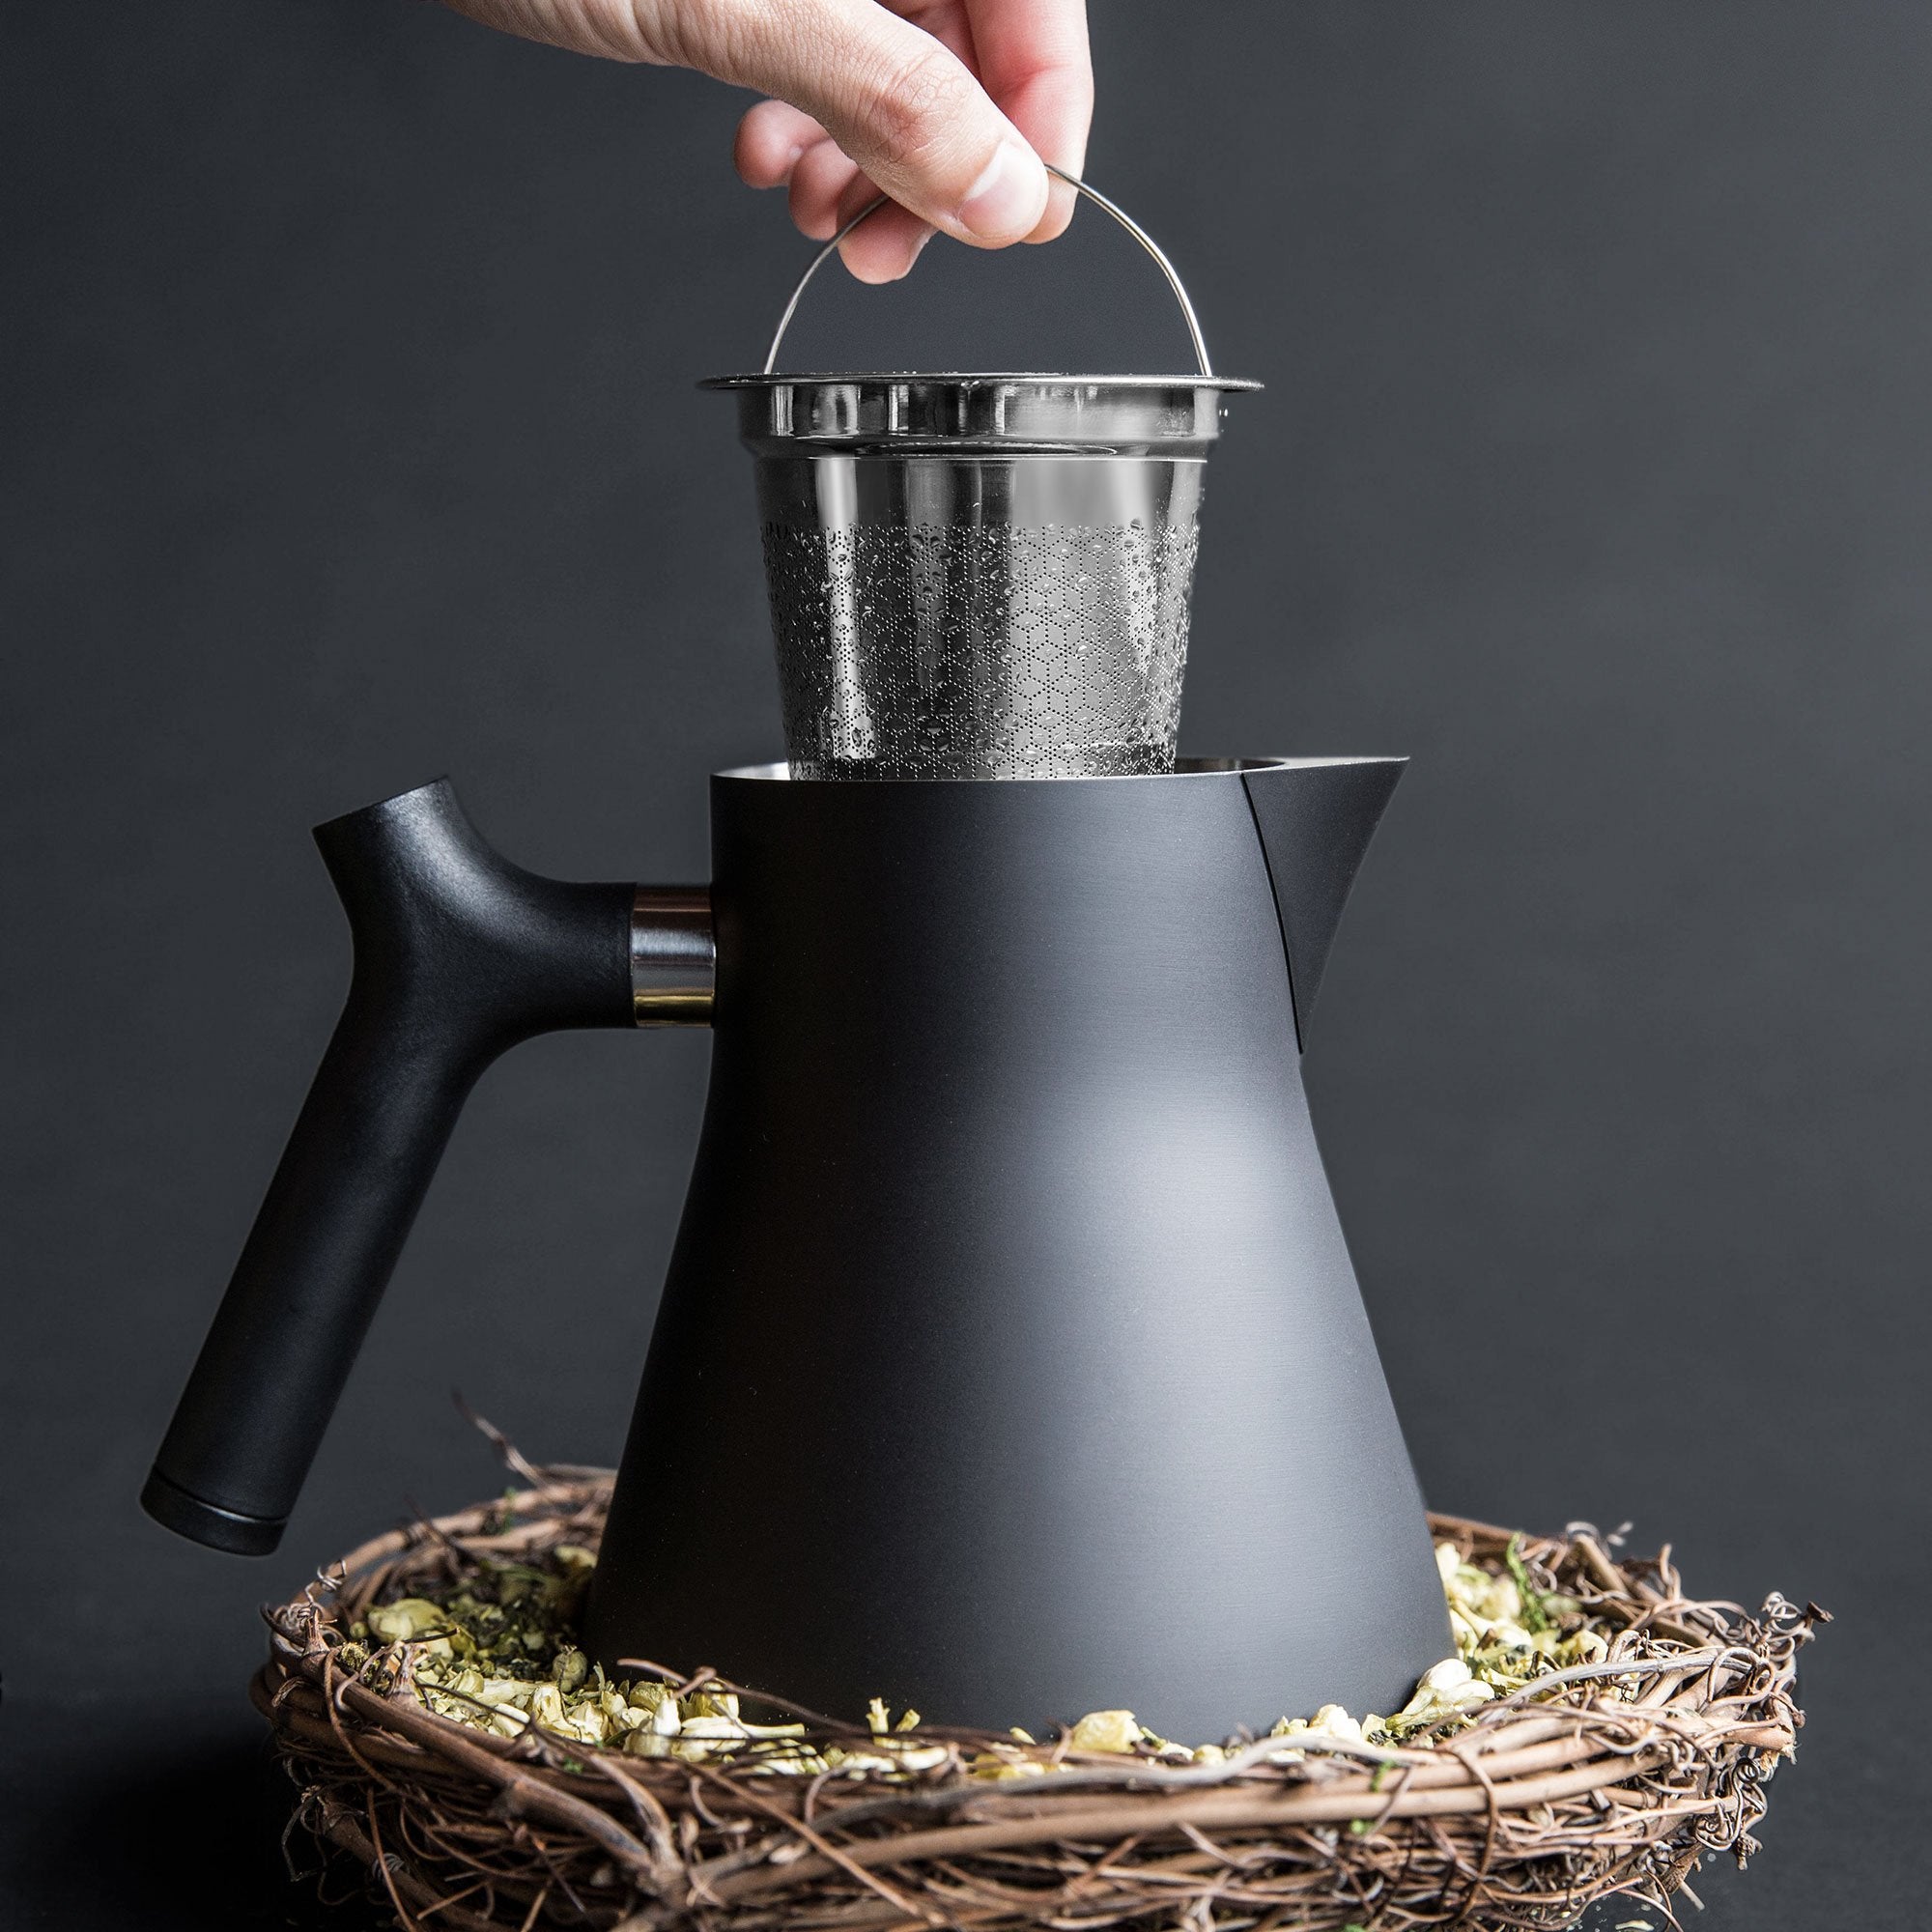 Cultivate Tea and Spice Raven Stove-Top Kettle and Tea Steeper